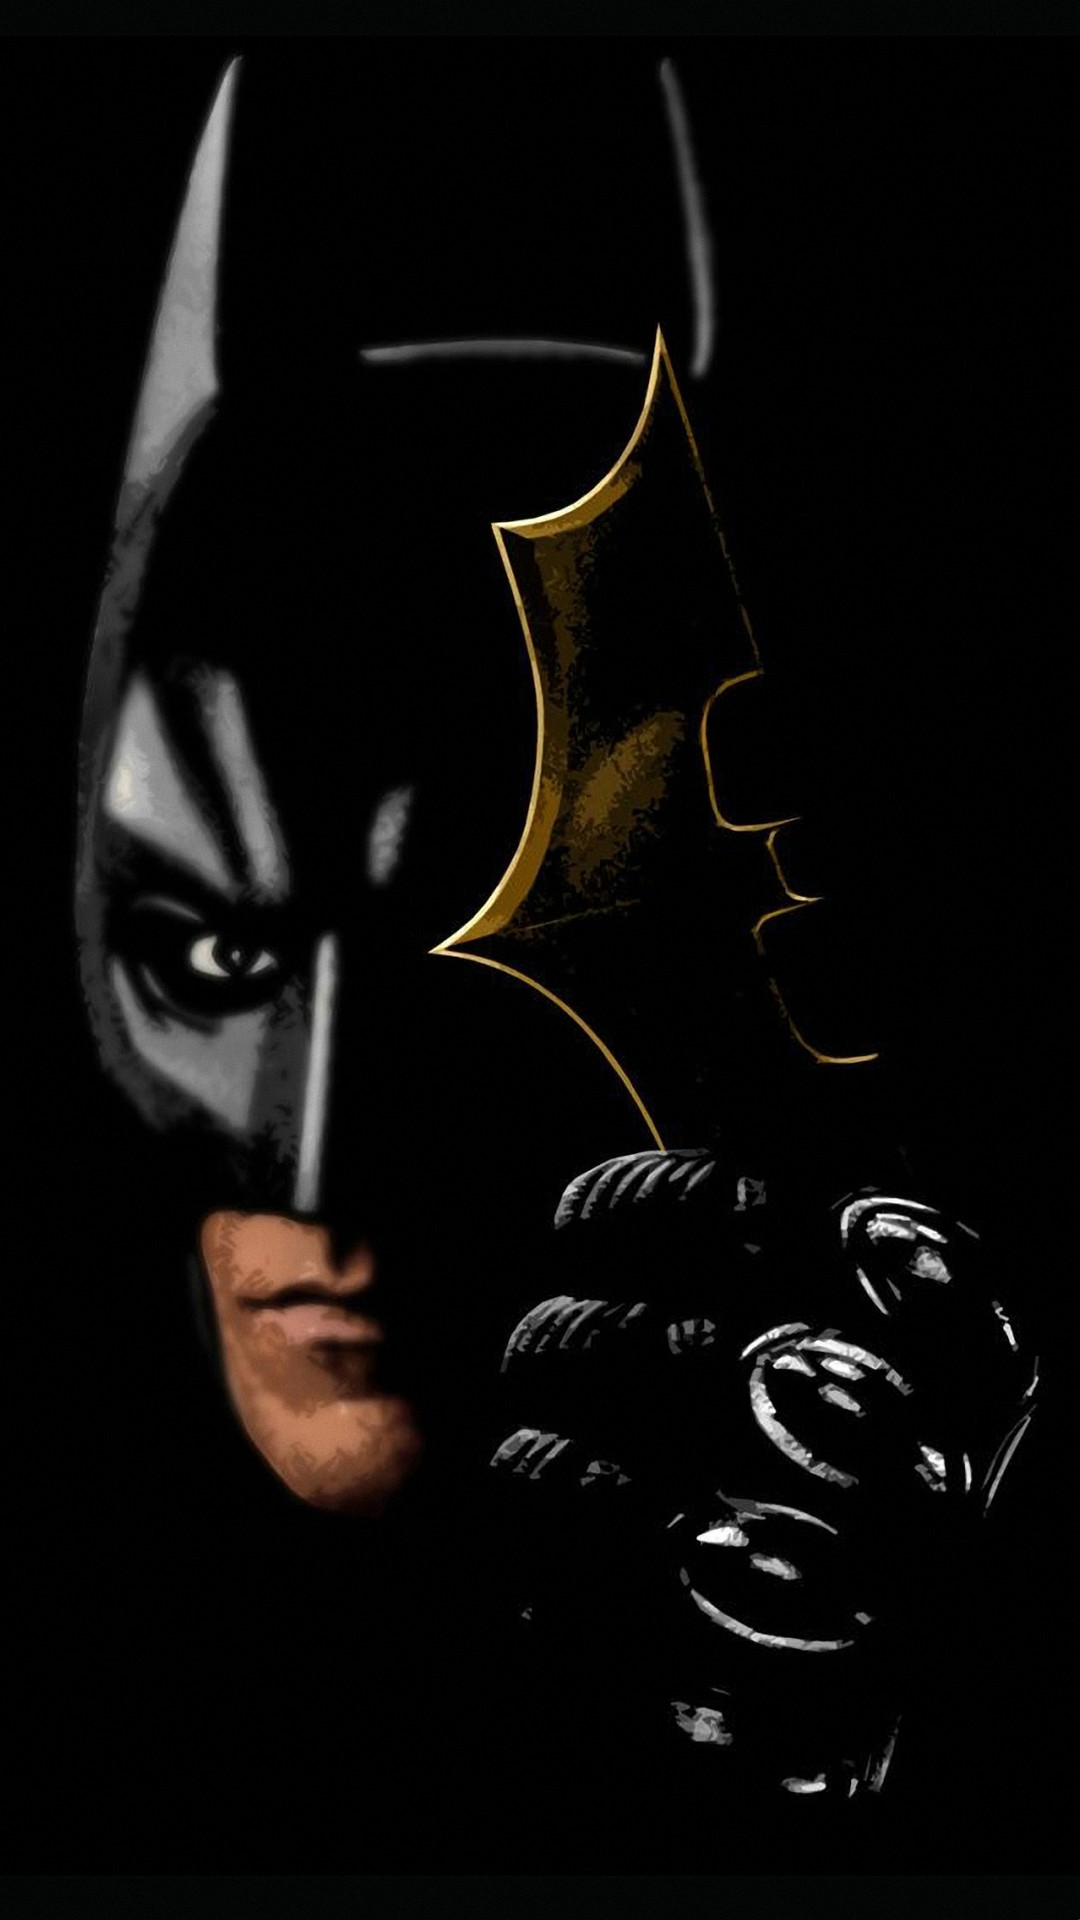 Batman Android Wallpaper with HD resolution 1080x1920